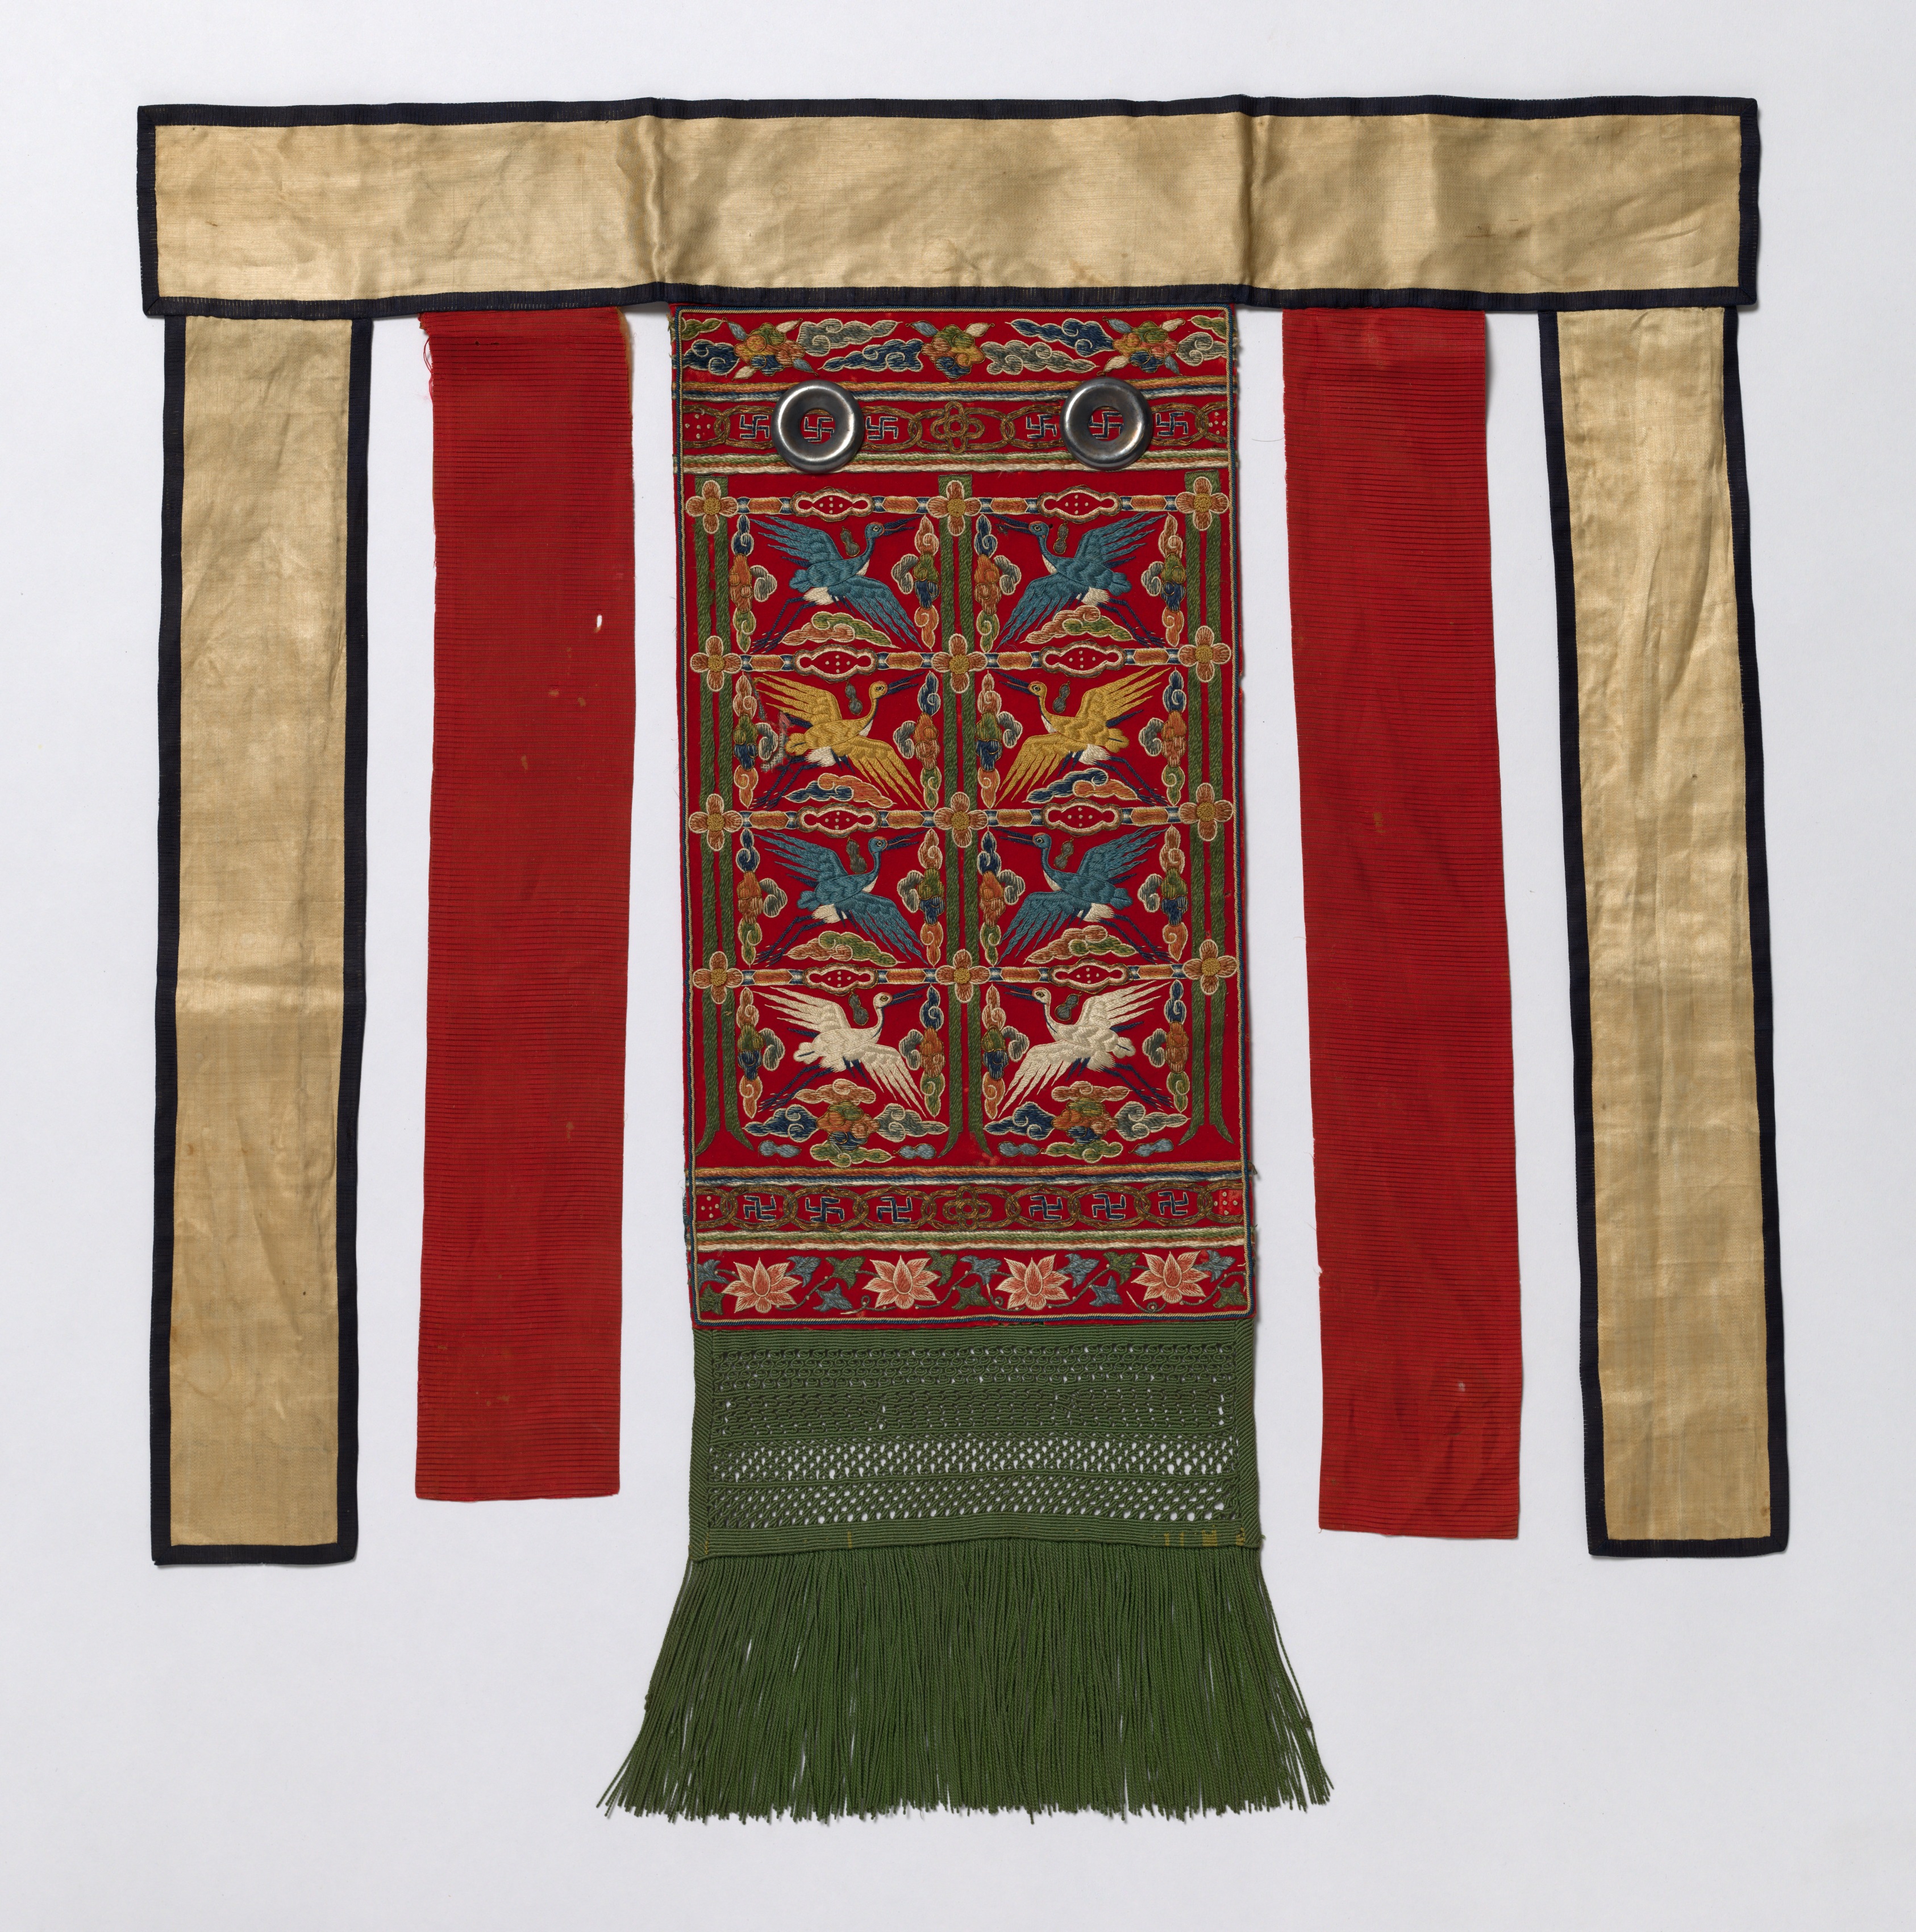 Back Apron for the Royal Ceremonial Robe